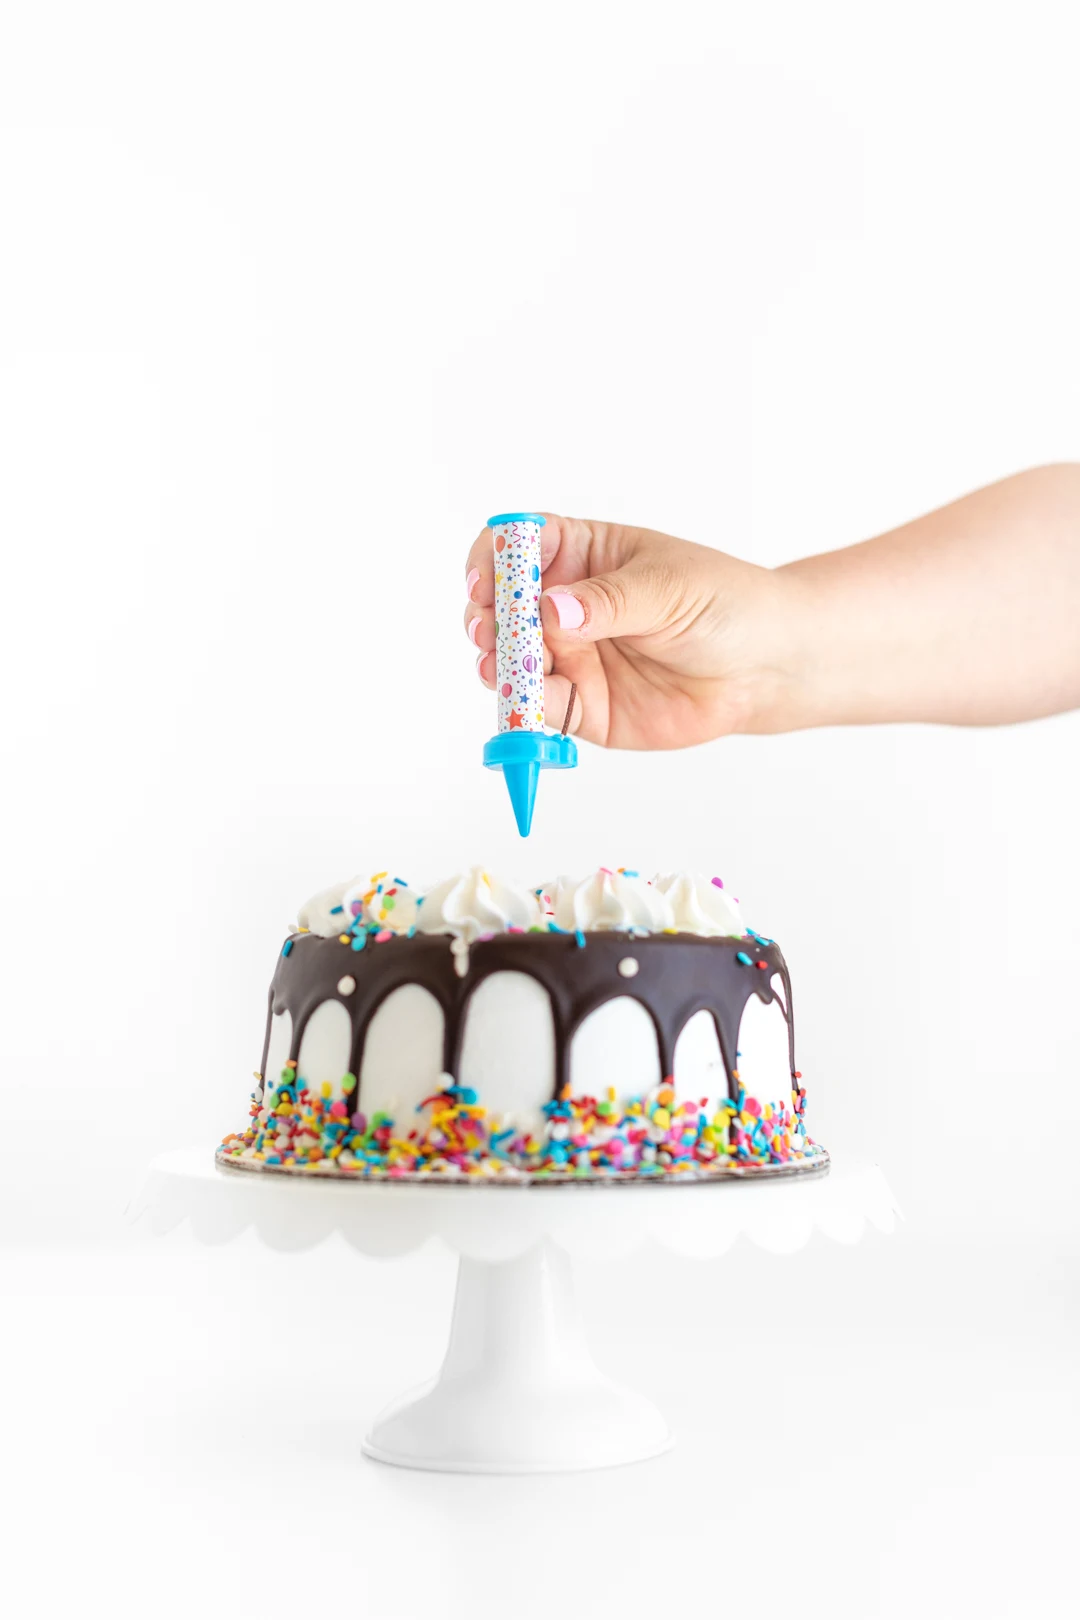 adding a surprise candle on top of a birthday cake